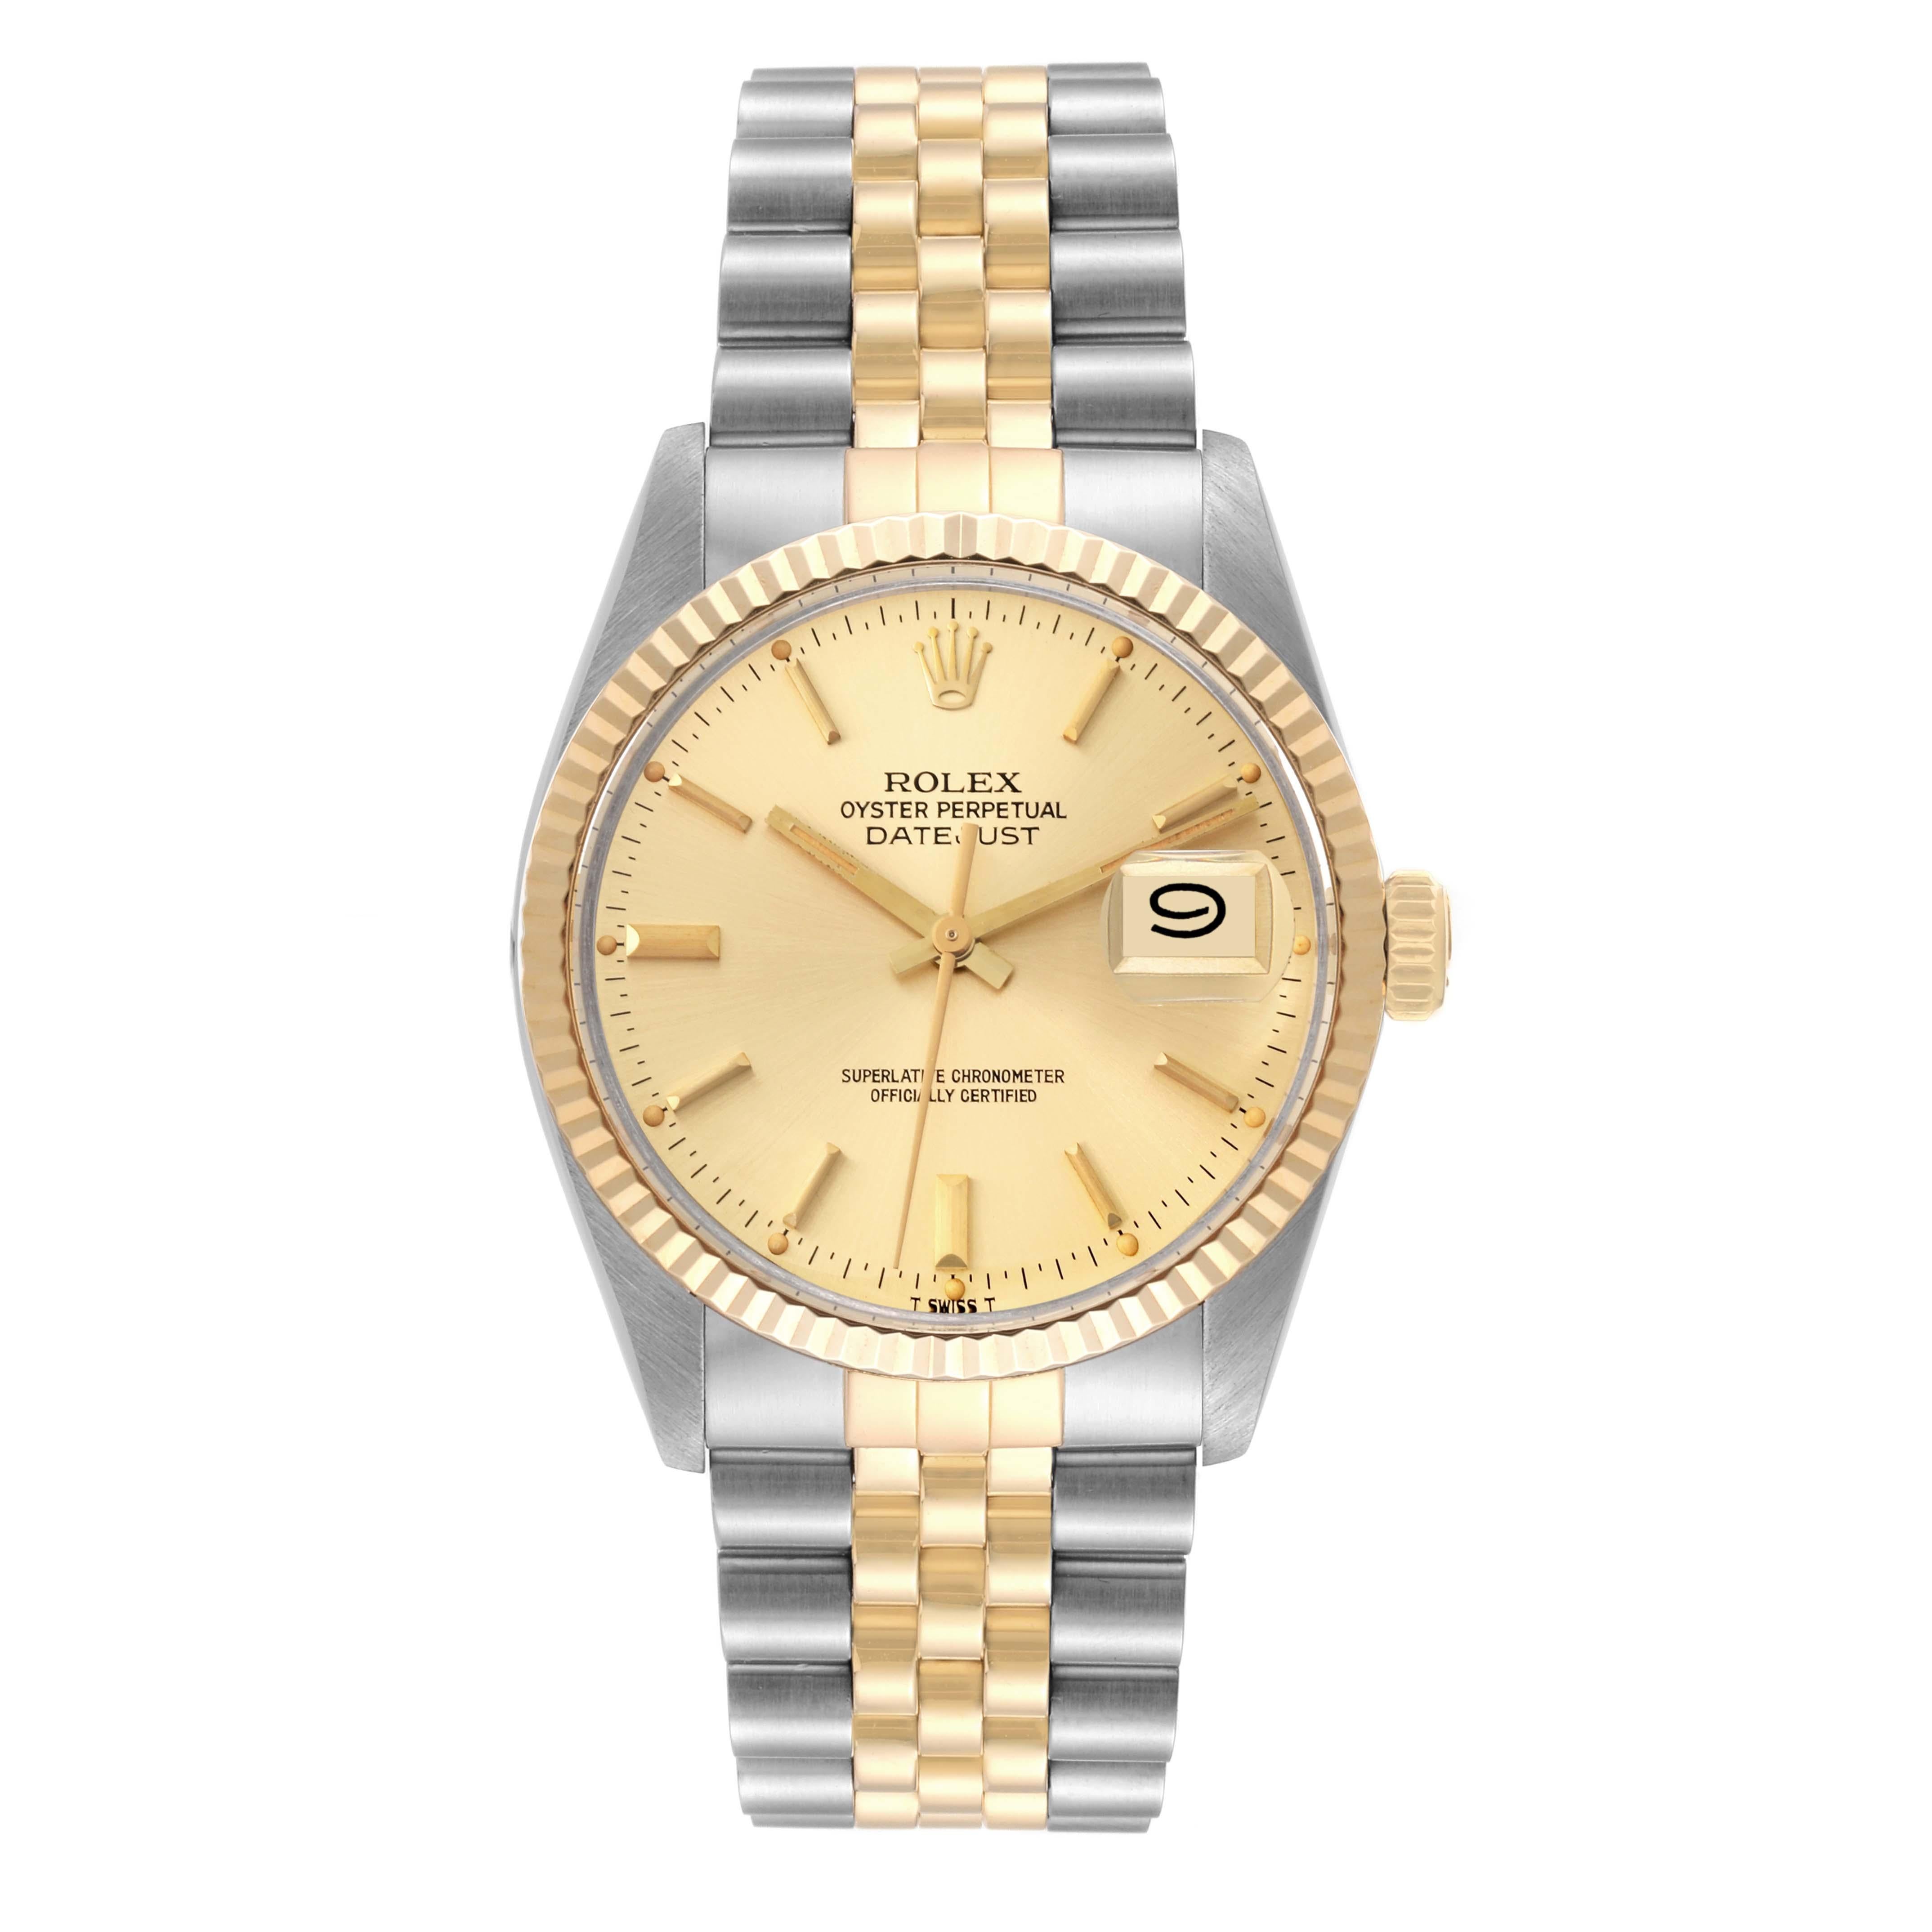 Rolex Datejust Steel Yellow Gold Vintage Mens Watch 16013 Box Papers. Officially certified chronometer automatic self-winding movement. Stainless steel and 18K yellow gold oyster case 36.0 mm in diameter. Rolex logo on an 18k yellow gold crown. 18k